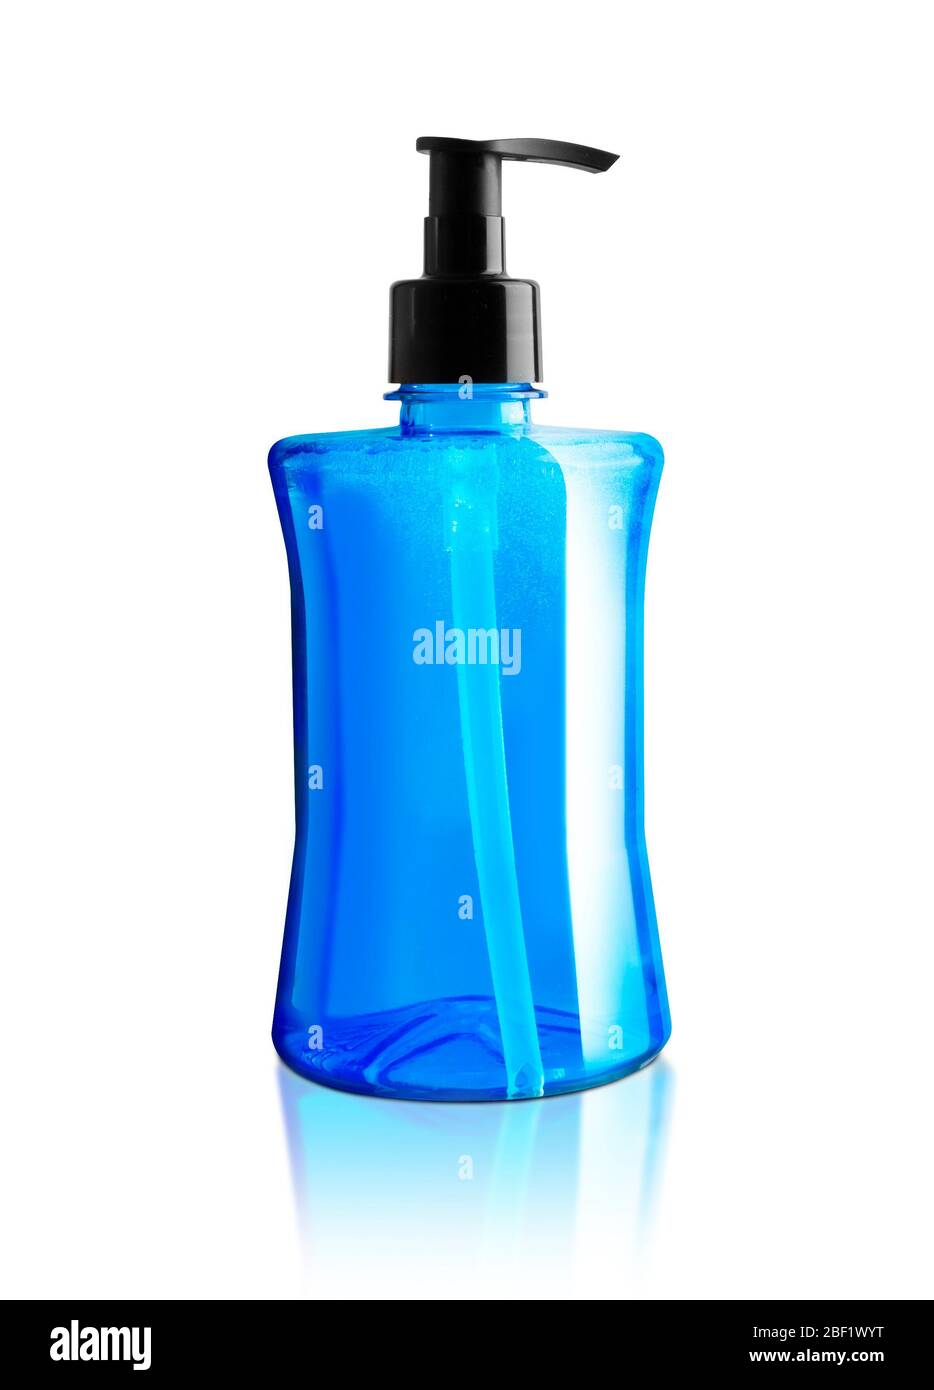 https://c8.alamy.com/comp/2BF1WYT/blue-liquid-soap-in-plastic-pump-bottle-isolated-on-white-background-with-clipping-path-2BF1WYT.jpg